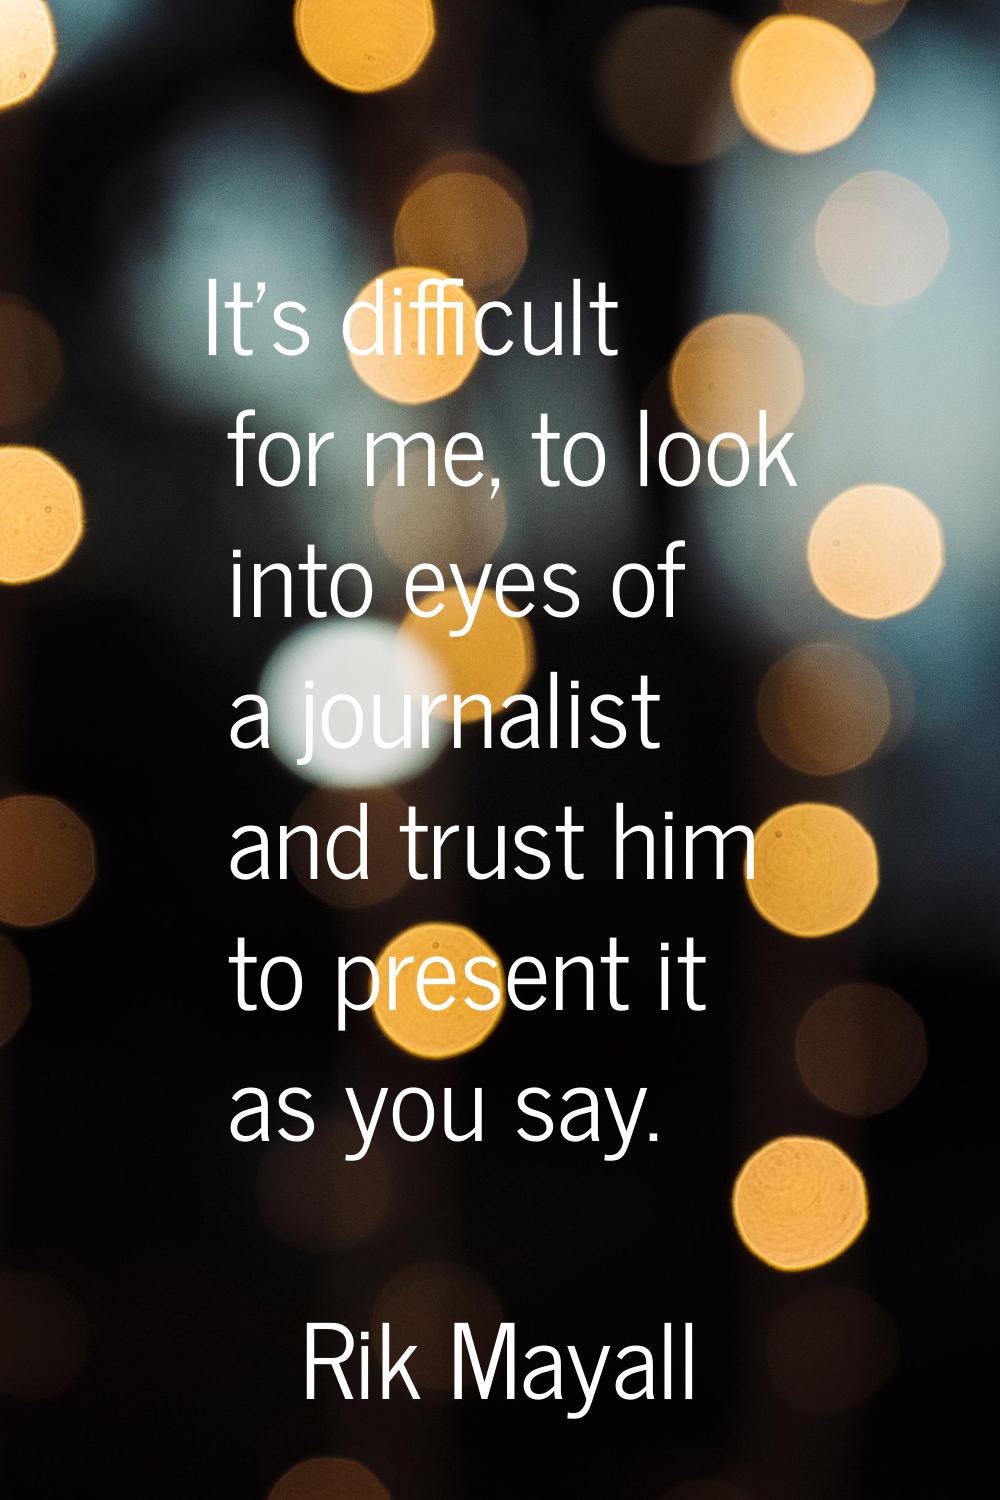 It's difficult for me, to look into eyes of a journalist and trust him to present it as you say.